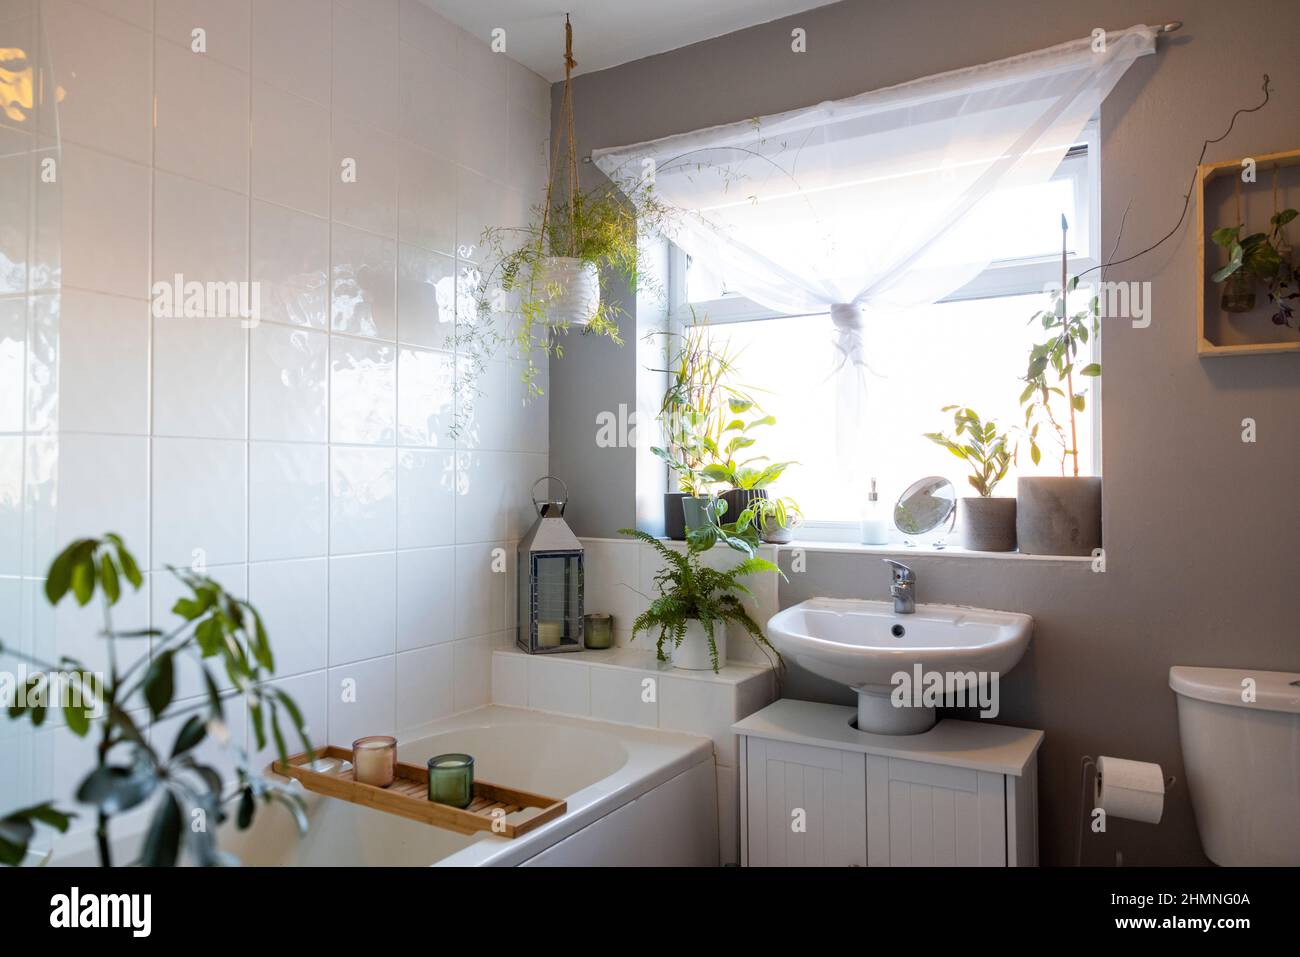 A wide-view shot of a modern bathroom interior decorated with houseplants. Stock Photo